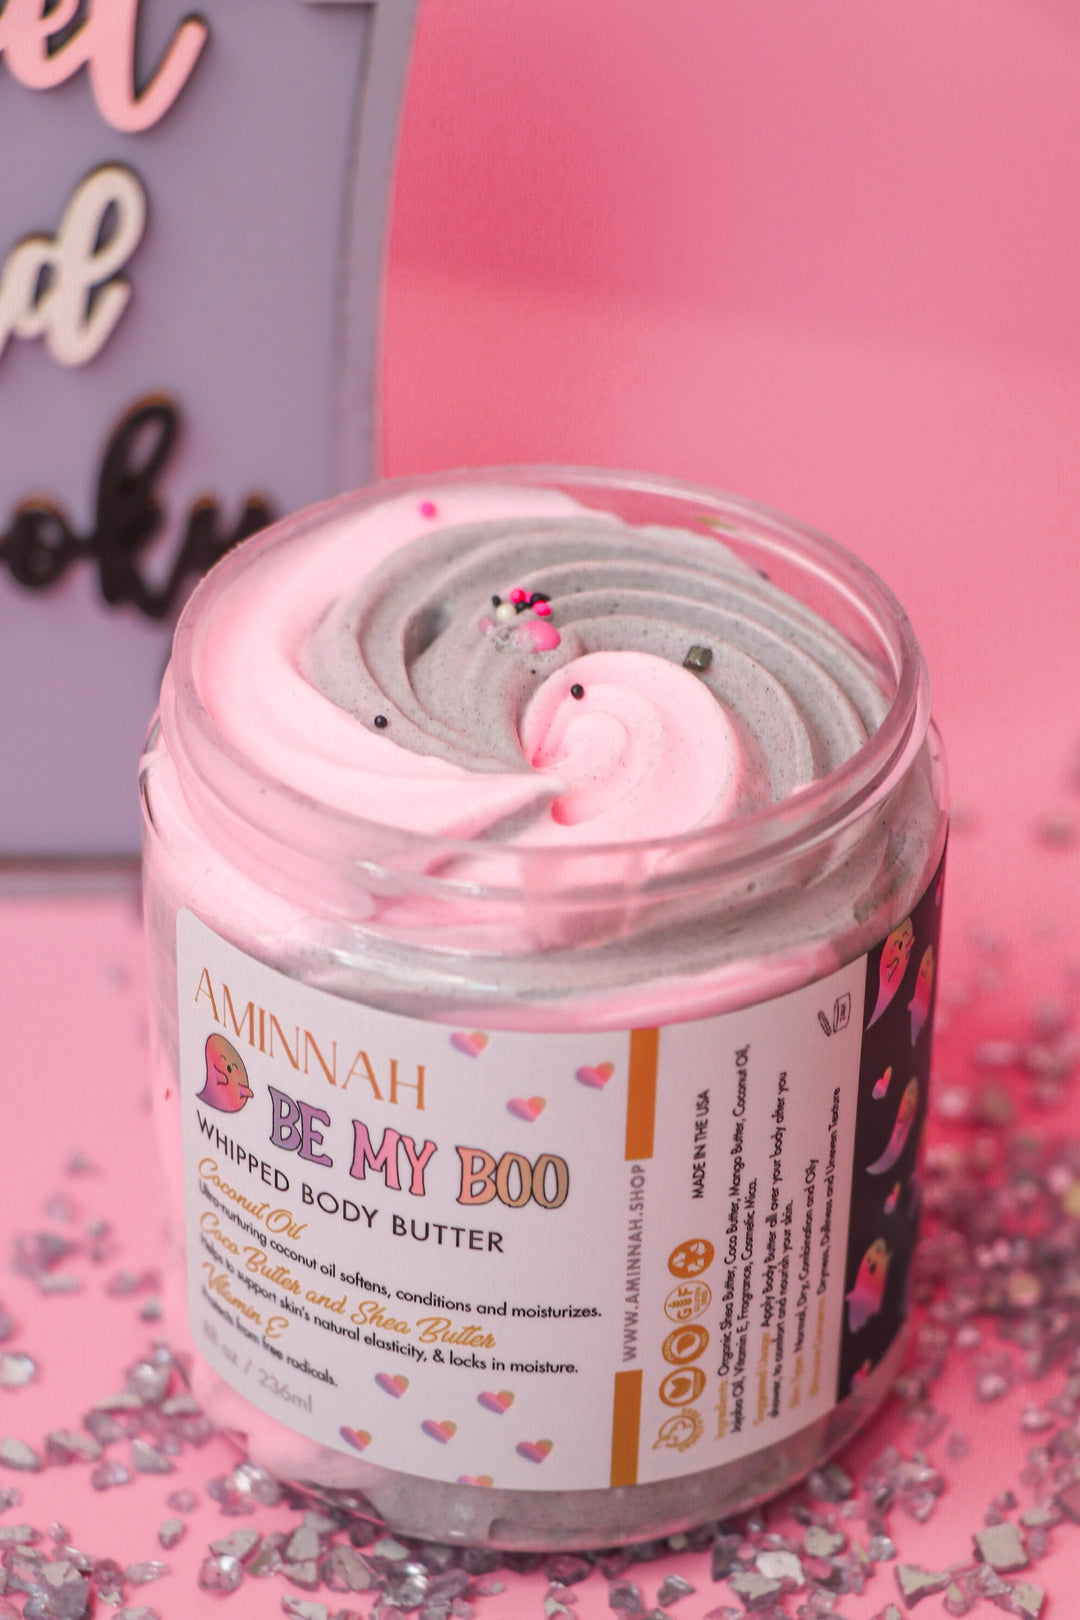 "Be My Boo" Whipped Body Butter 👻